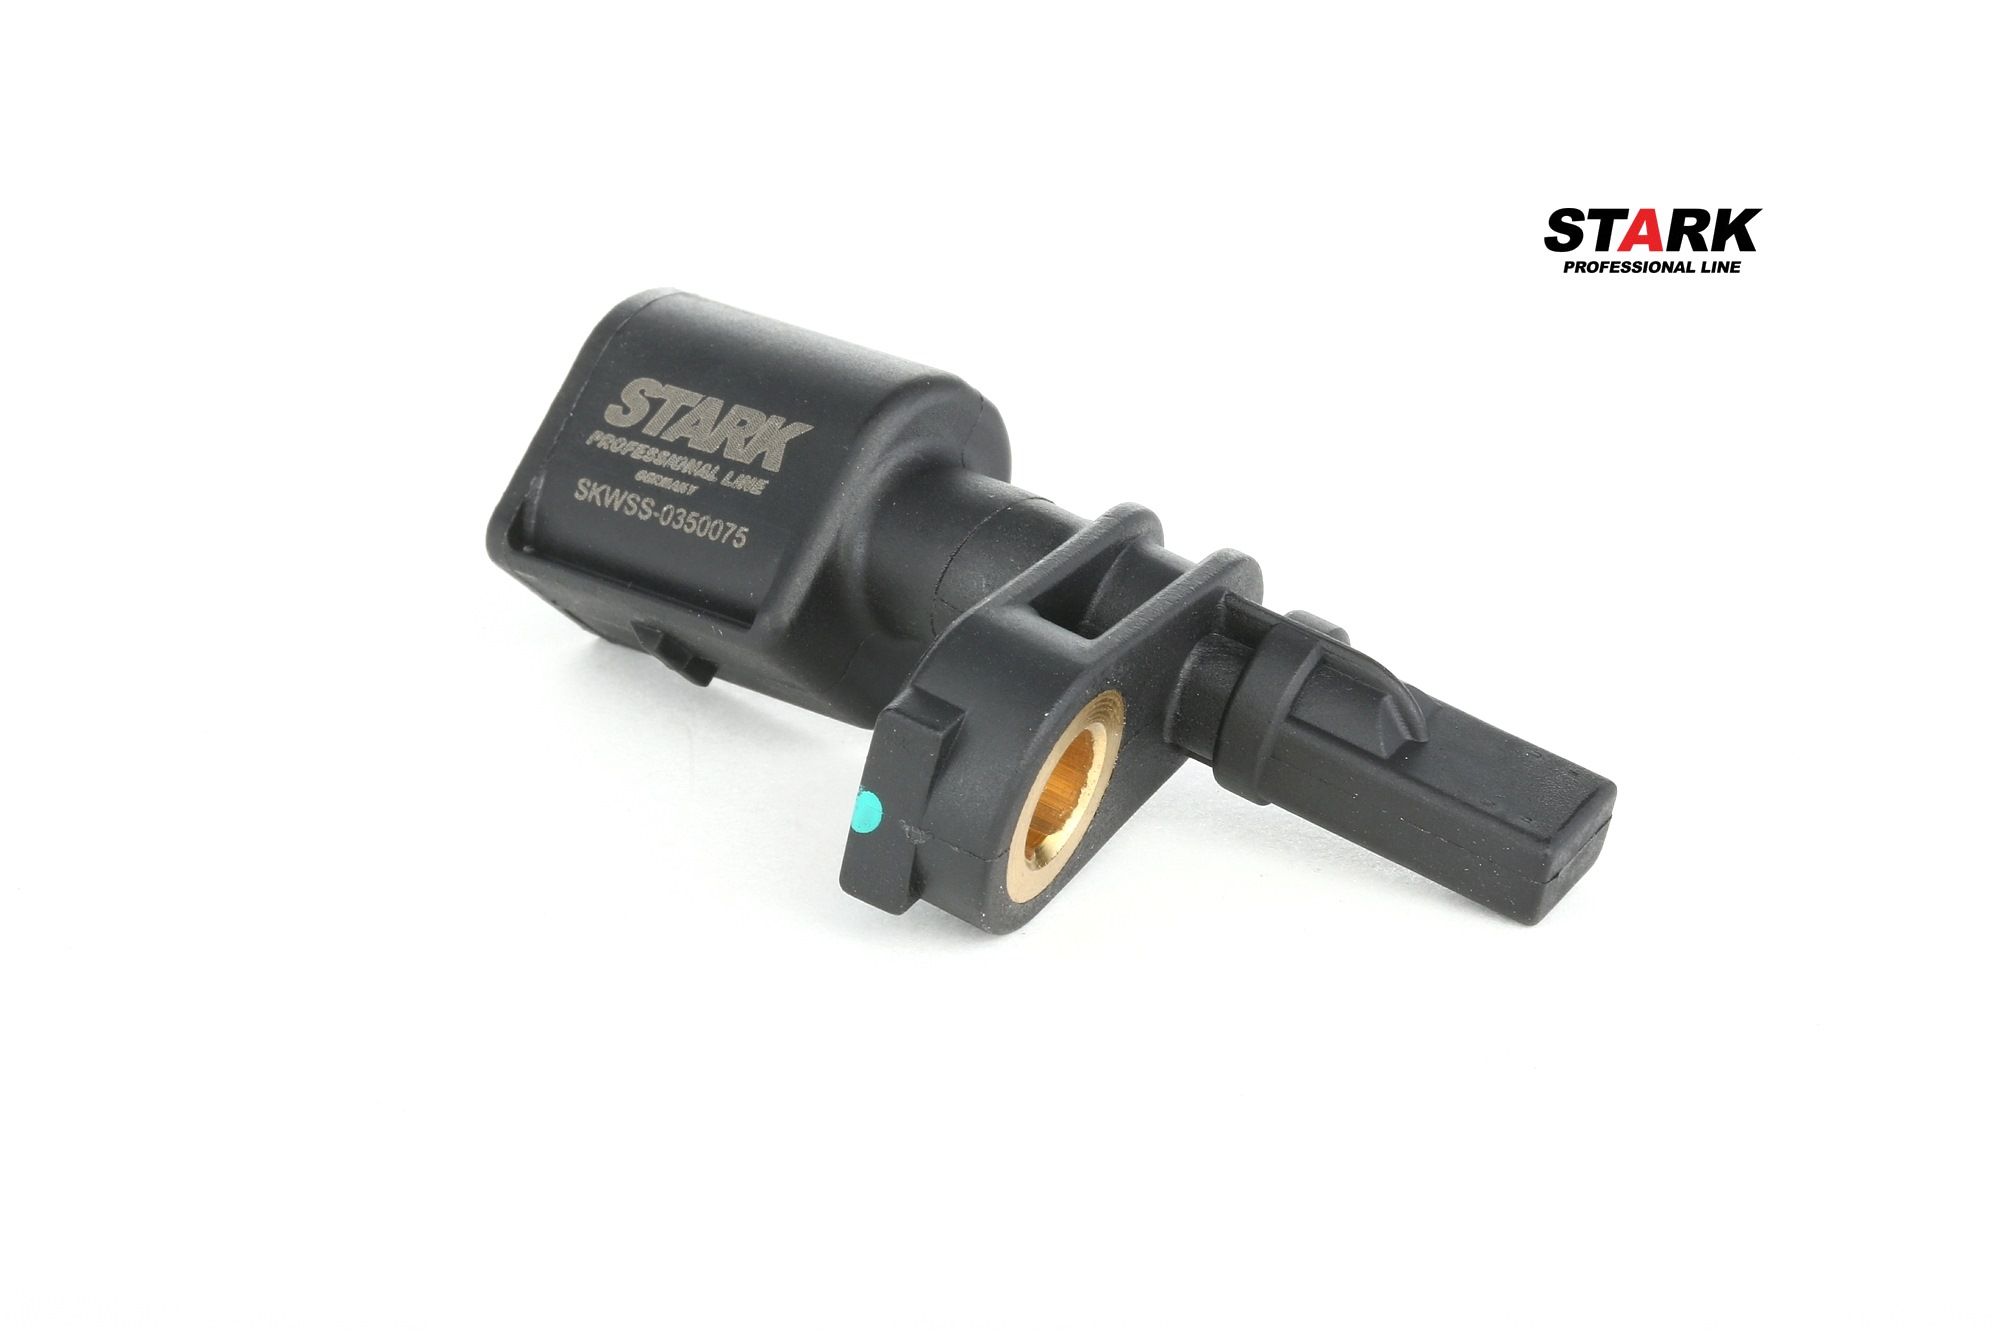 STARK SKWSS-0350075 ABS sensor Front Axle Left, without cable, Hall Sensor, 2-pin connector, 21mm, 62mm, D Shape